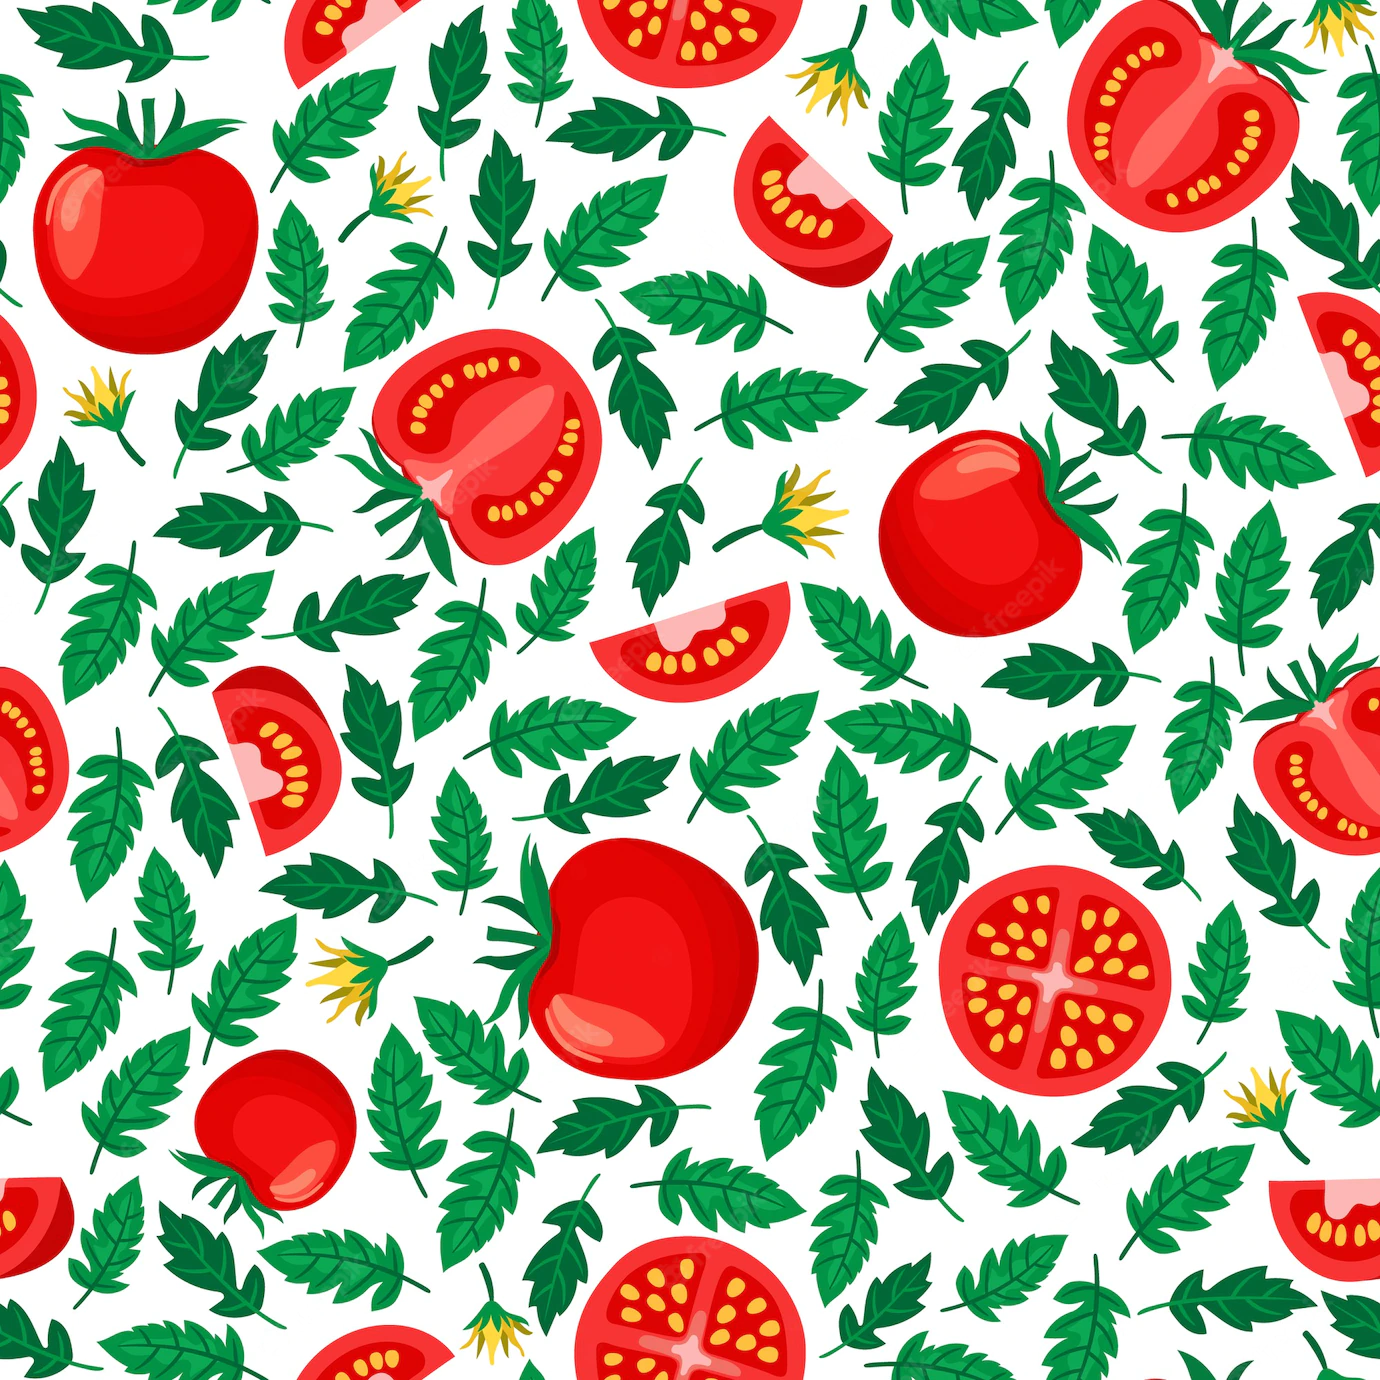 Tomatoes Seamless Pattern White Background With Sliced Whole Tomatoes Leaves 1284 41571